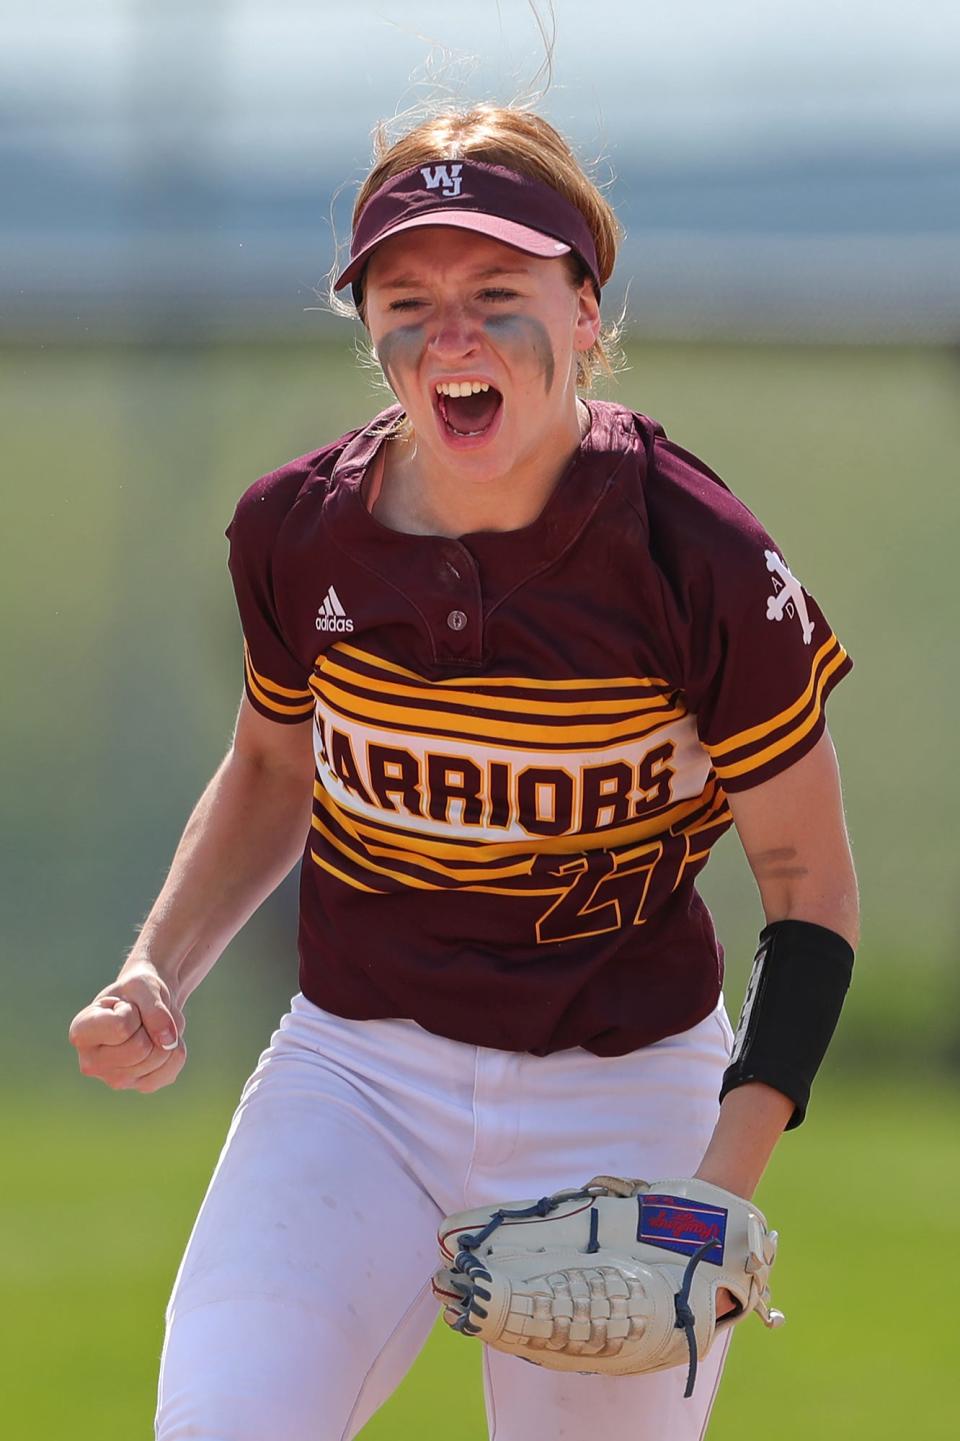 Walsh Jesuit shortstop Keeley Clinton celebrates after beating Painesville Riverside, 4-2, in a Division I district semifinal softball game at Massillon High School on Monday.